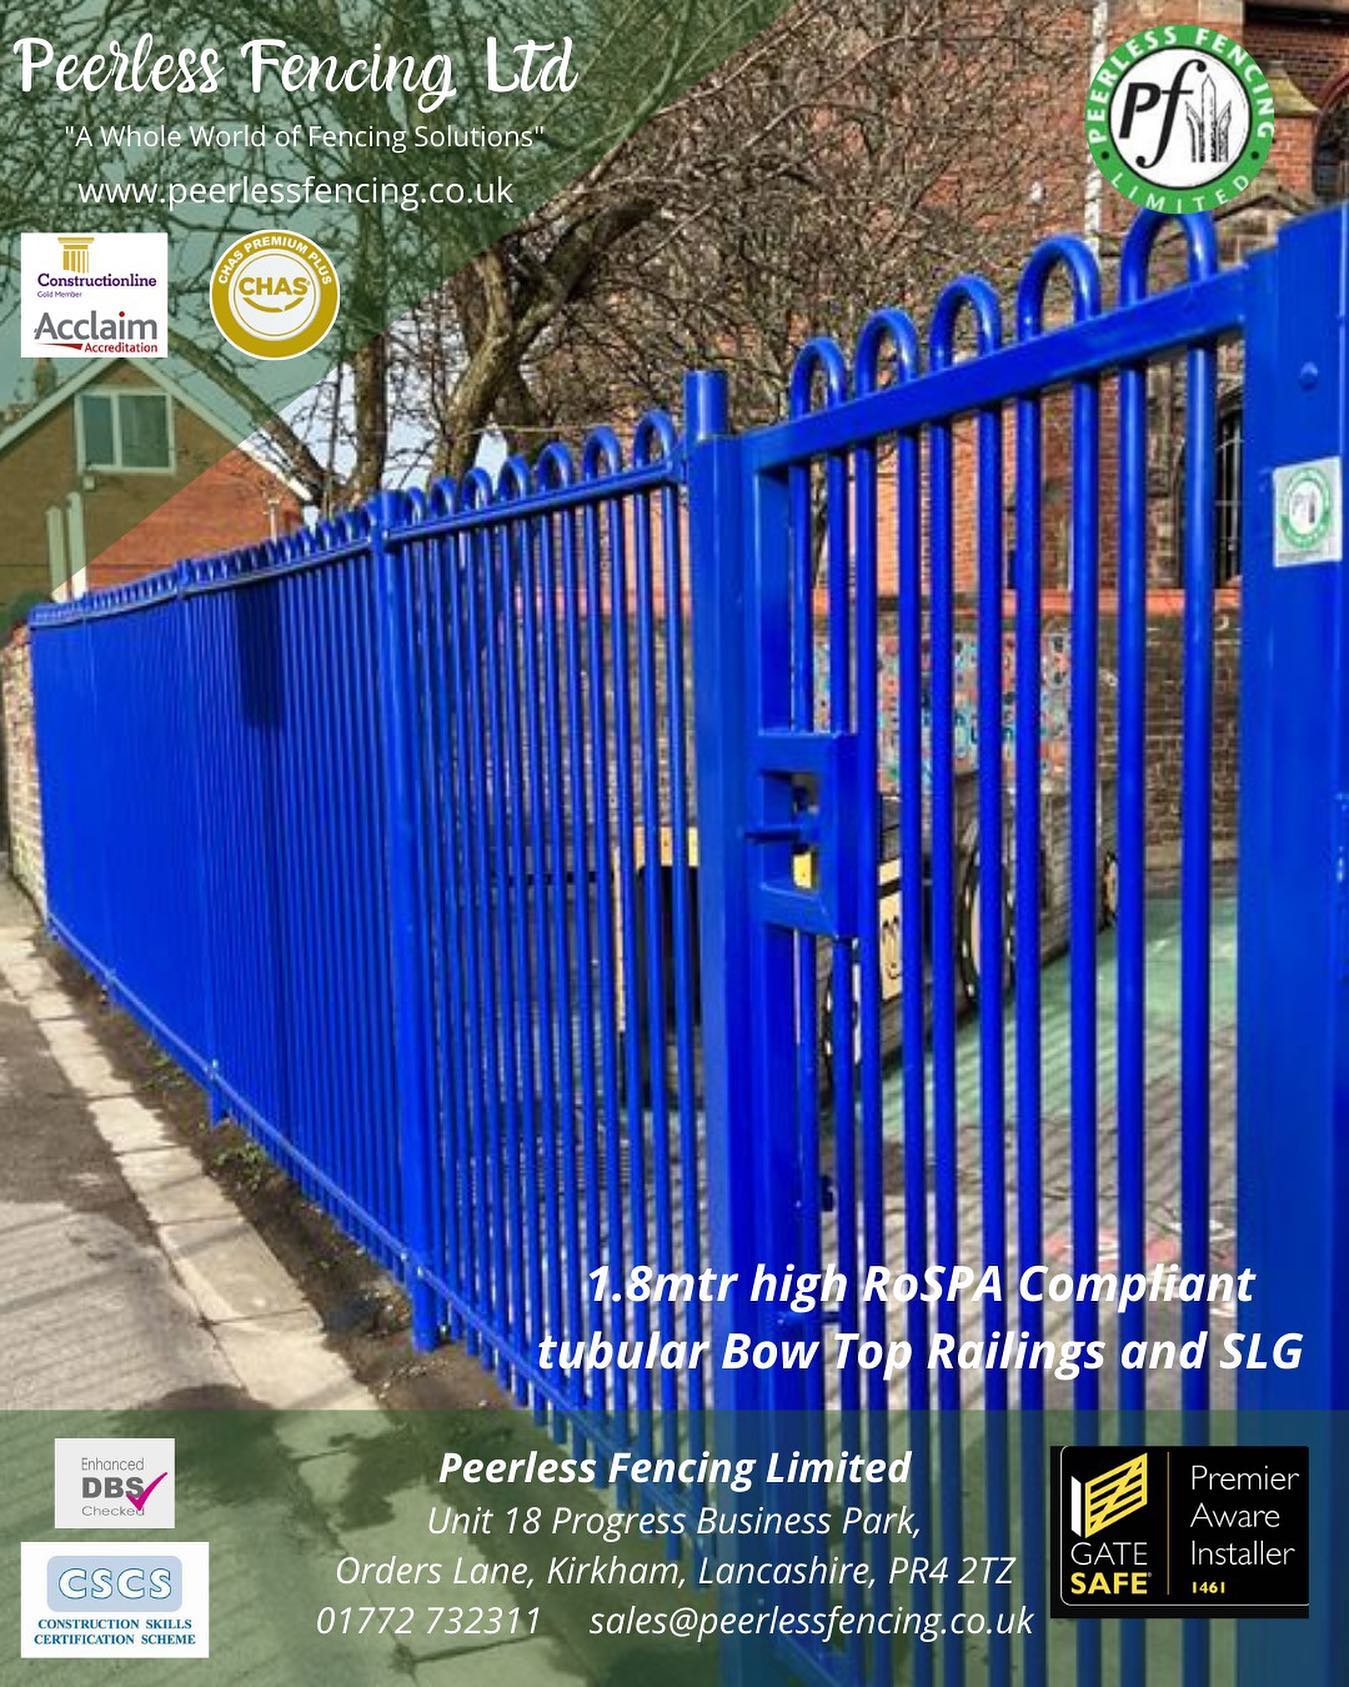 A great installation of 1.8mtr high ROSPA compliant Bow Top Railings. Safeguarding with elegance and style. #rospa #gatesafe #safeguardingchildren #schoolfencing #playgroundfencing #fencingcontractor